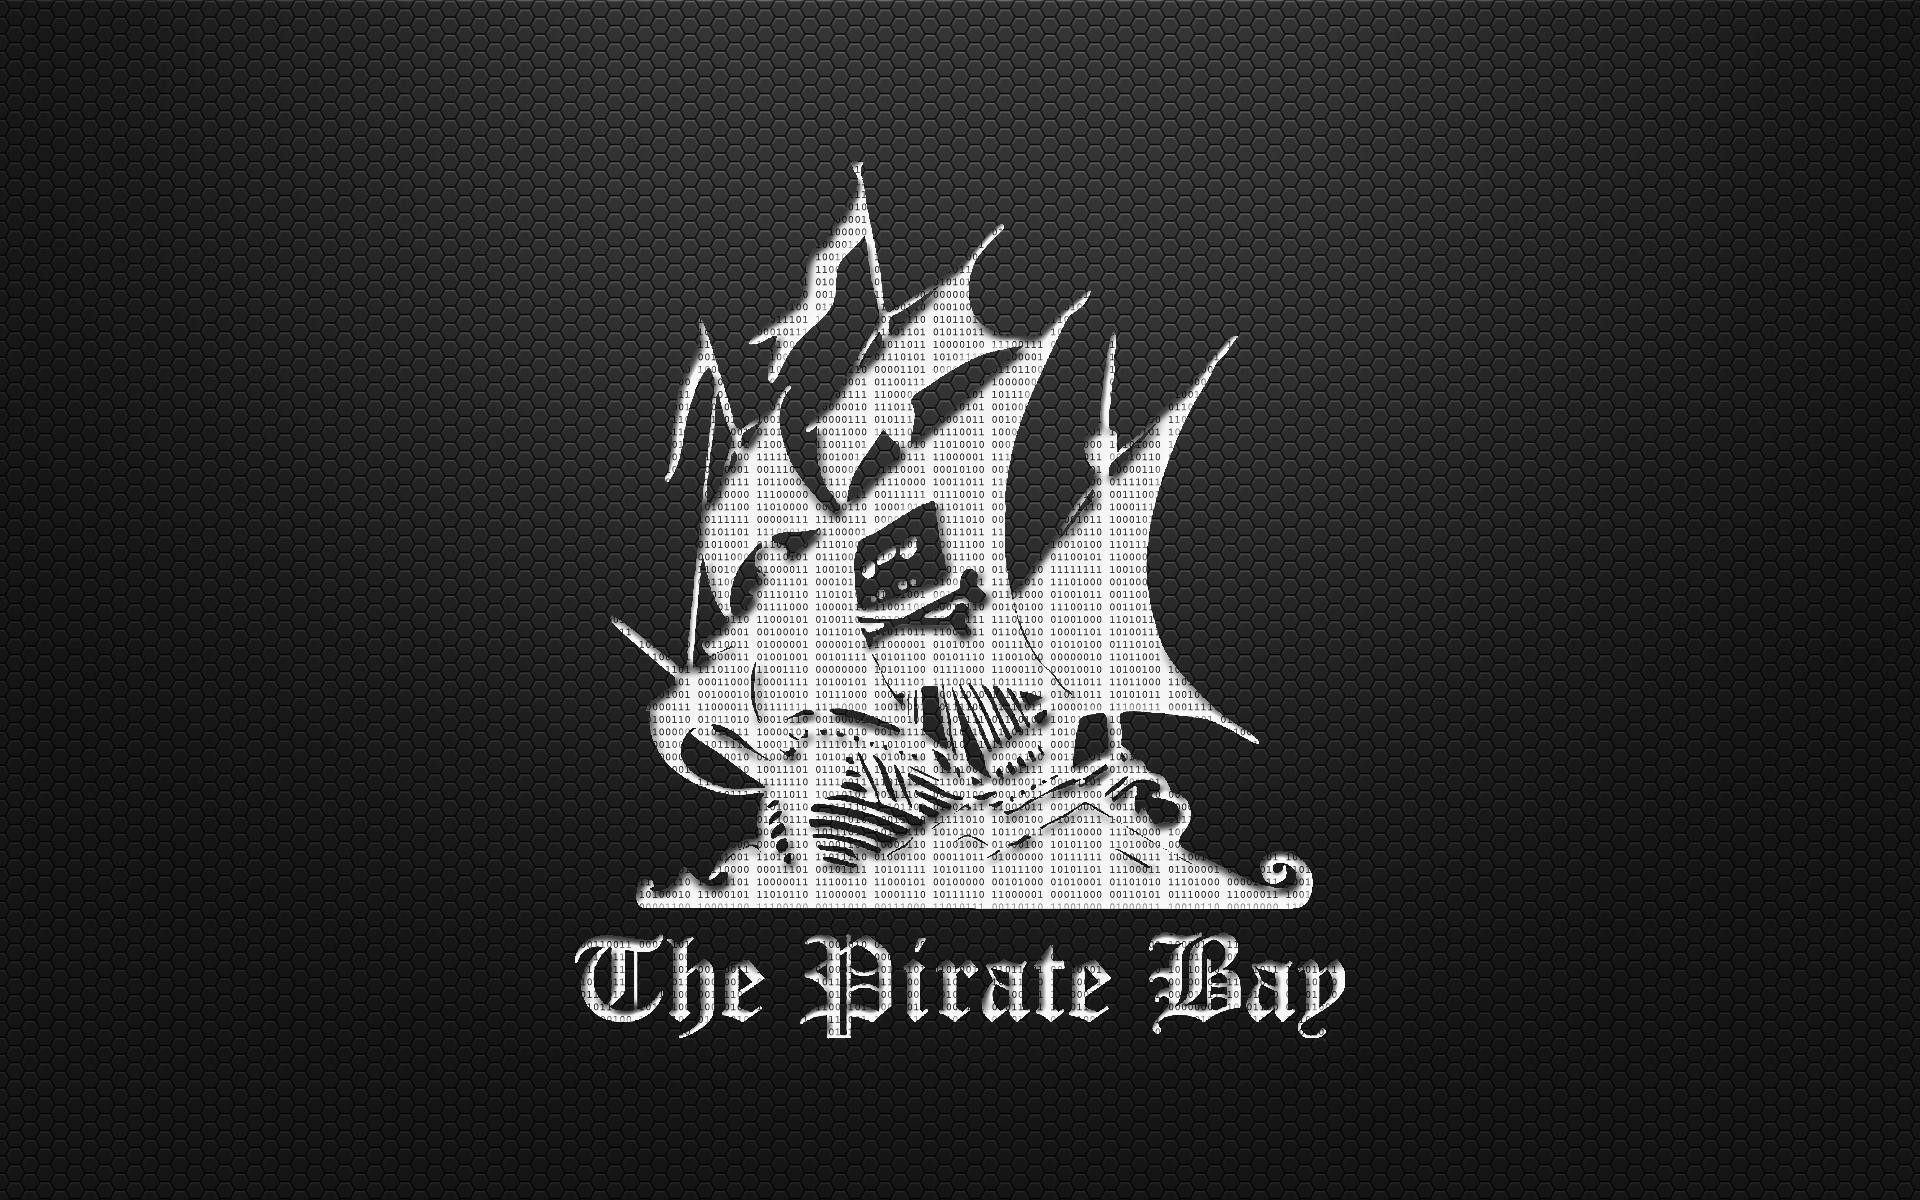 General 1920x1200 The Pirate Bay digital art black background monochrome ship rigging (ship) numbers texture